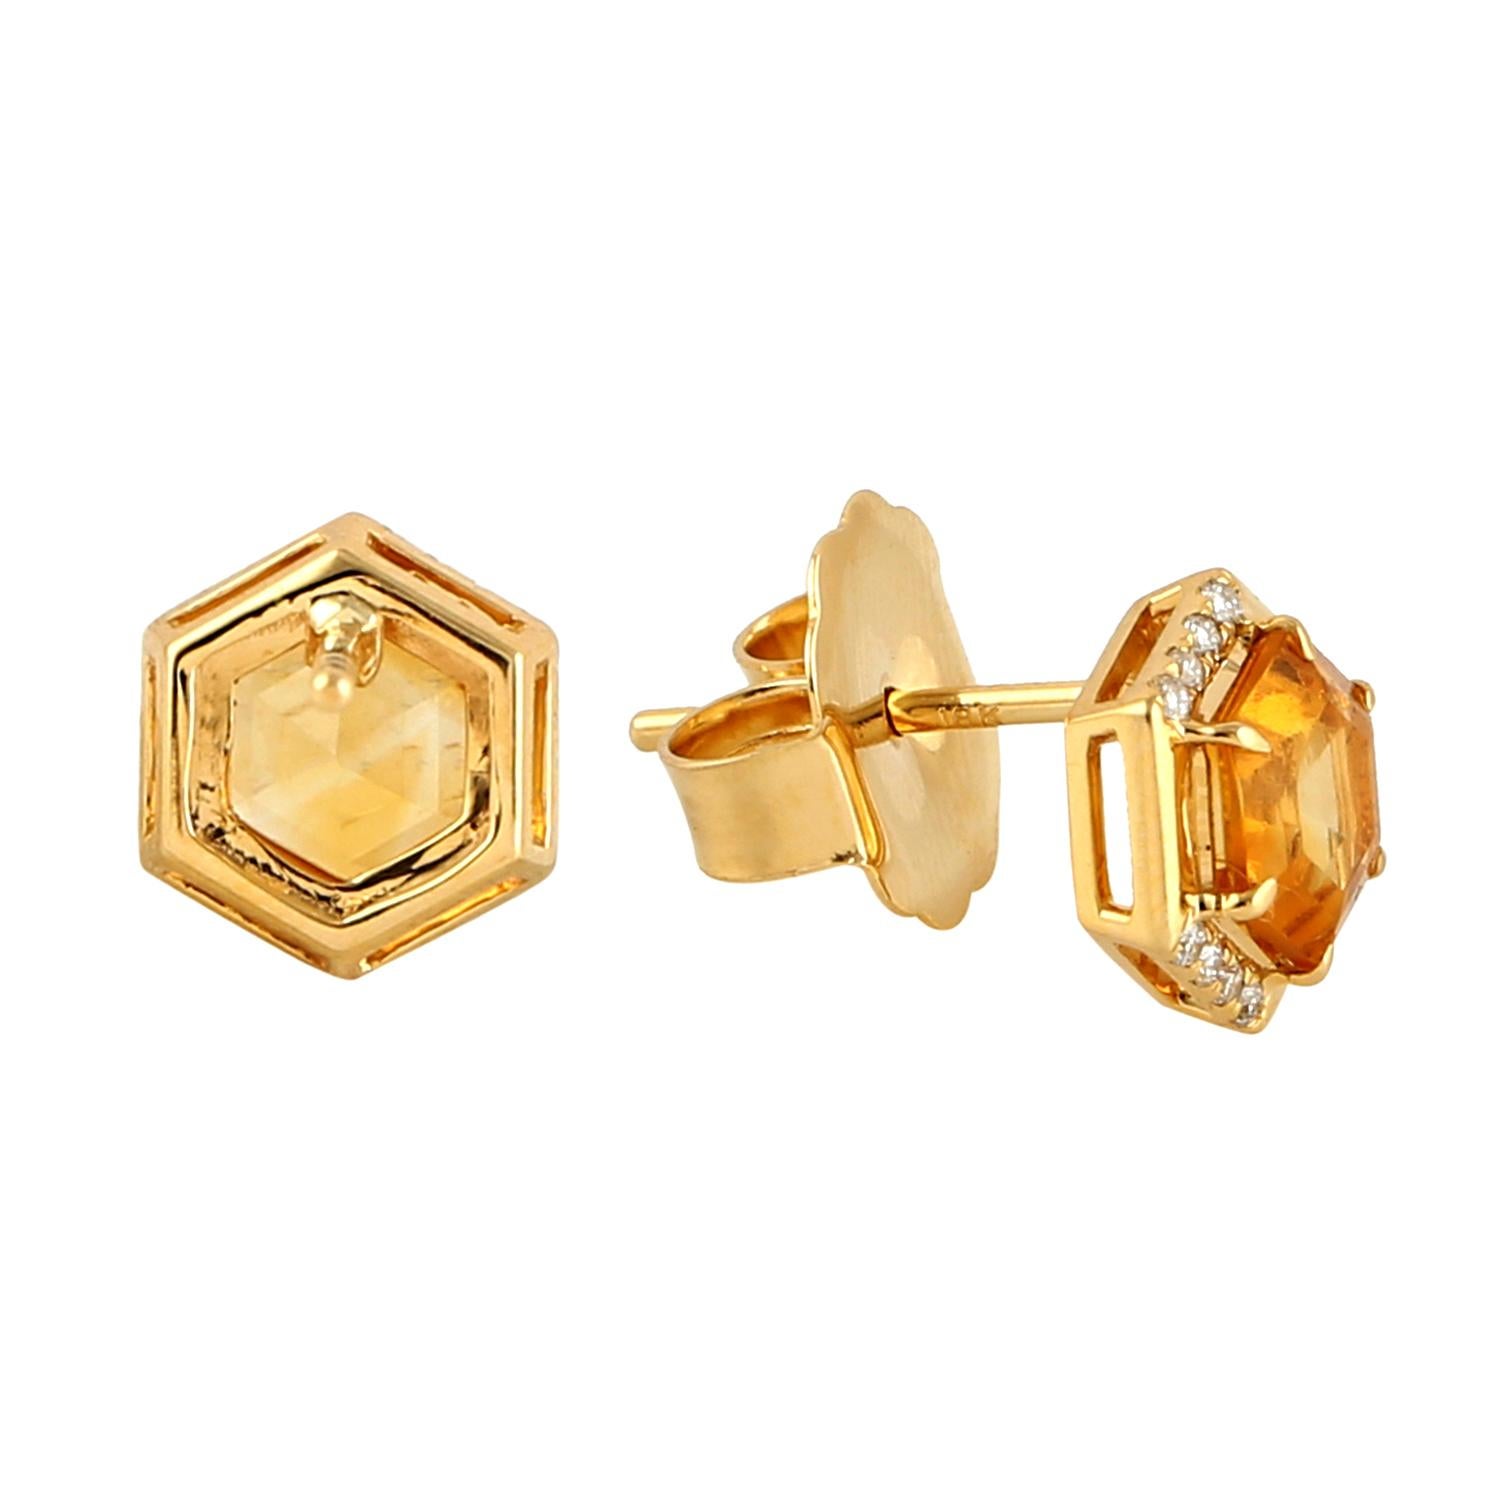 Cast in 18-karat gold. These beautiful earrings are set with 1.65 carats of citrine and .12 carats of sparkling diamonds.  See other collection matching pieces.

FOLLOW  MEGHNA JEWELS storefront to view the latest collection & exclusive pieces. 